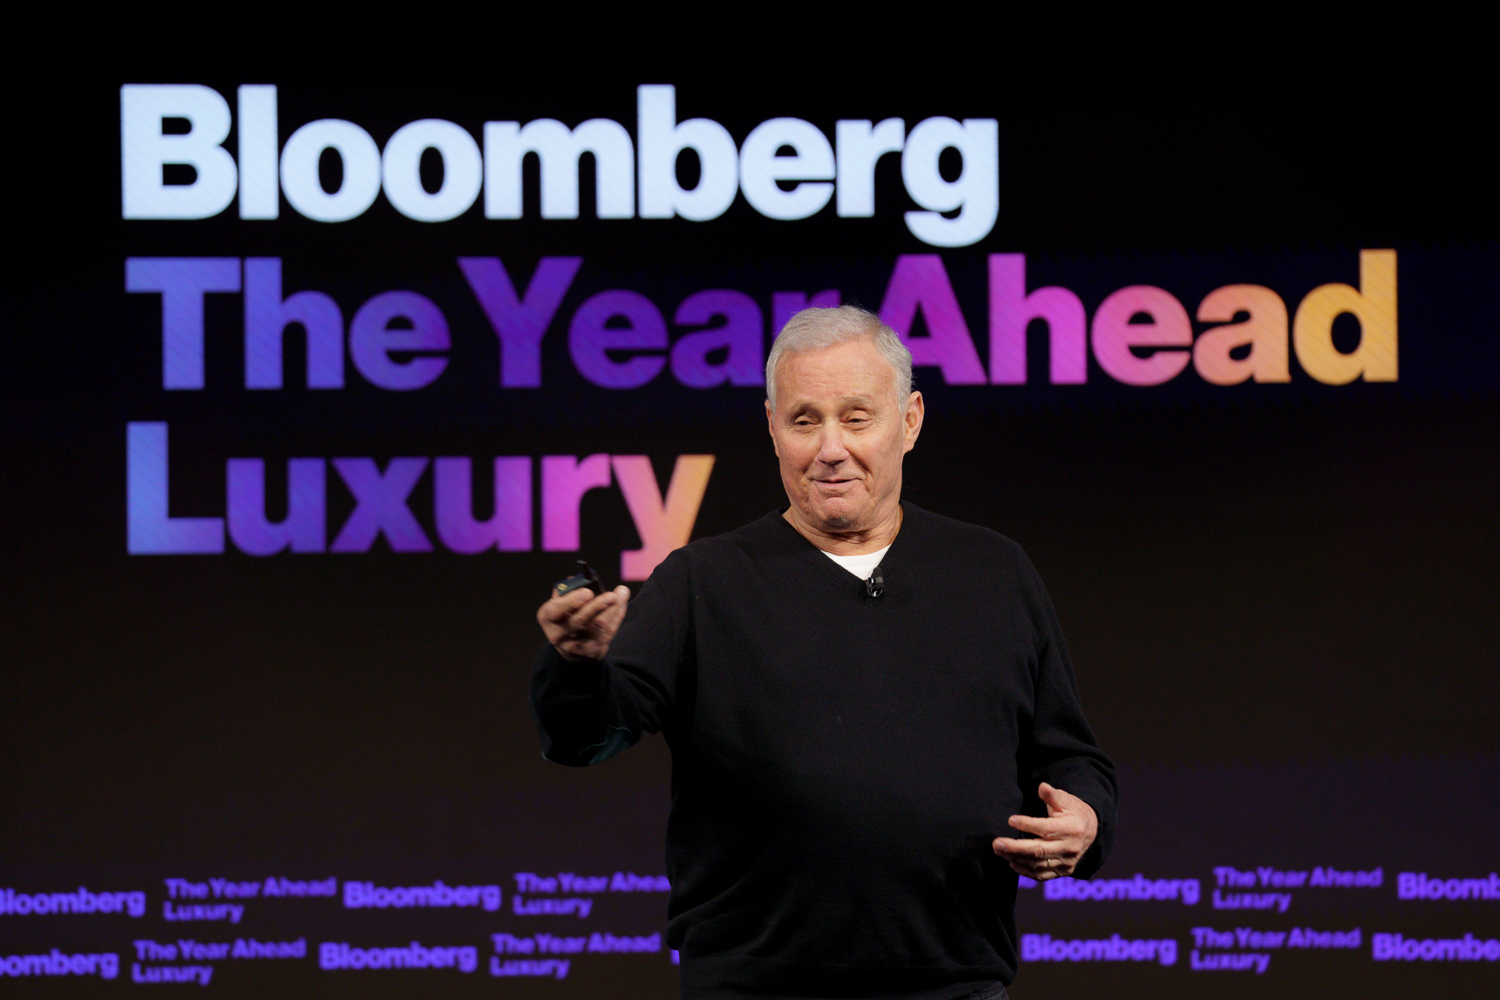 Ian Schrager speaking at Bloomberg’s The Year Ahead: Luxury conference.